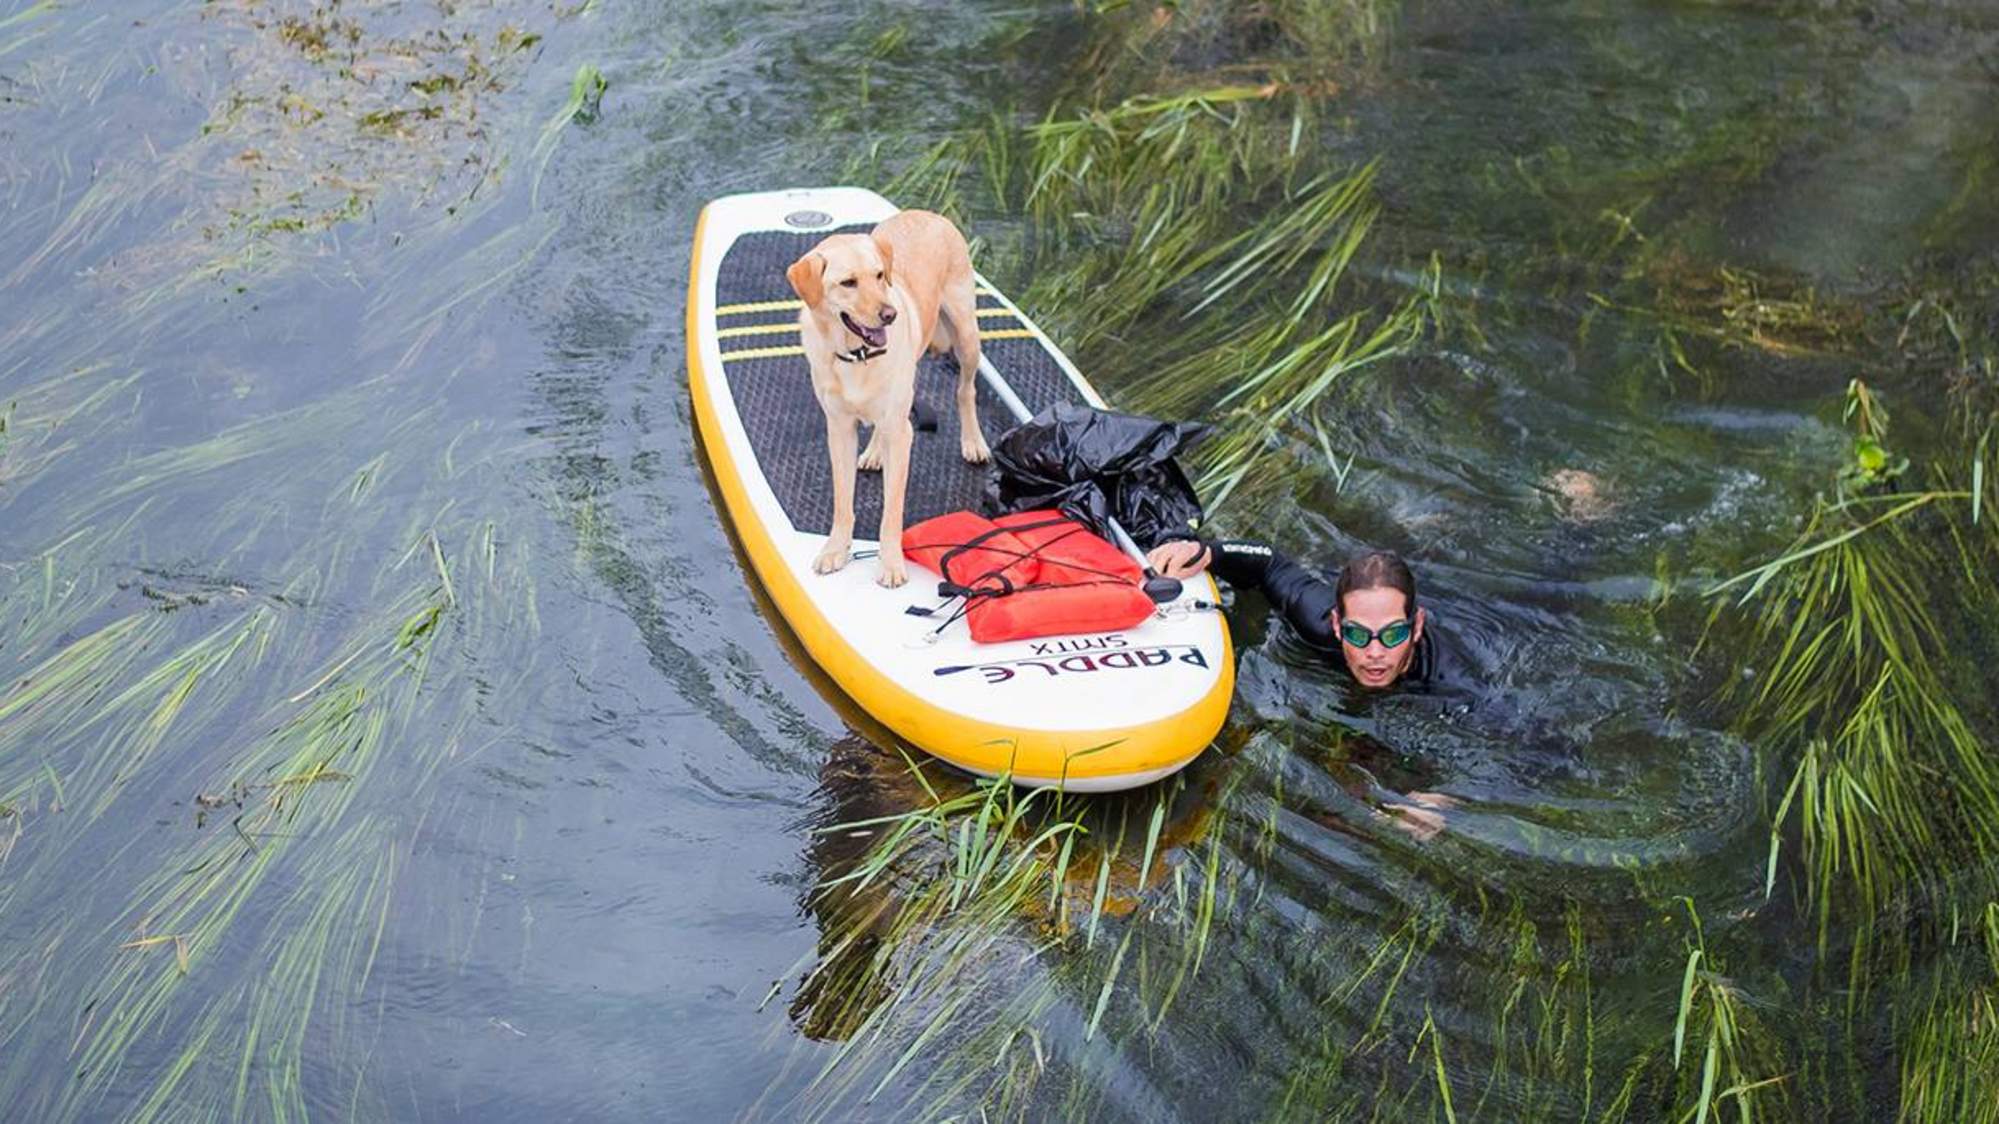 a man pulls his paddle board through the river rice with his dog happily riding along